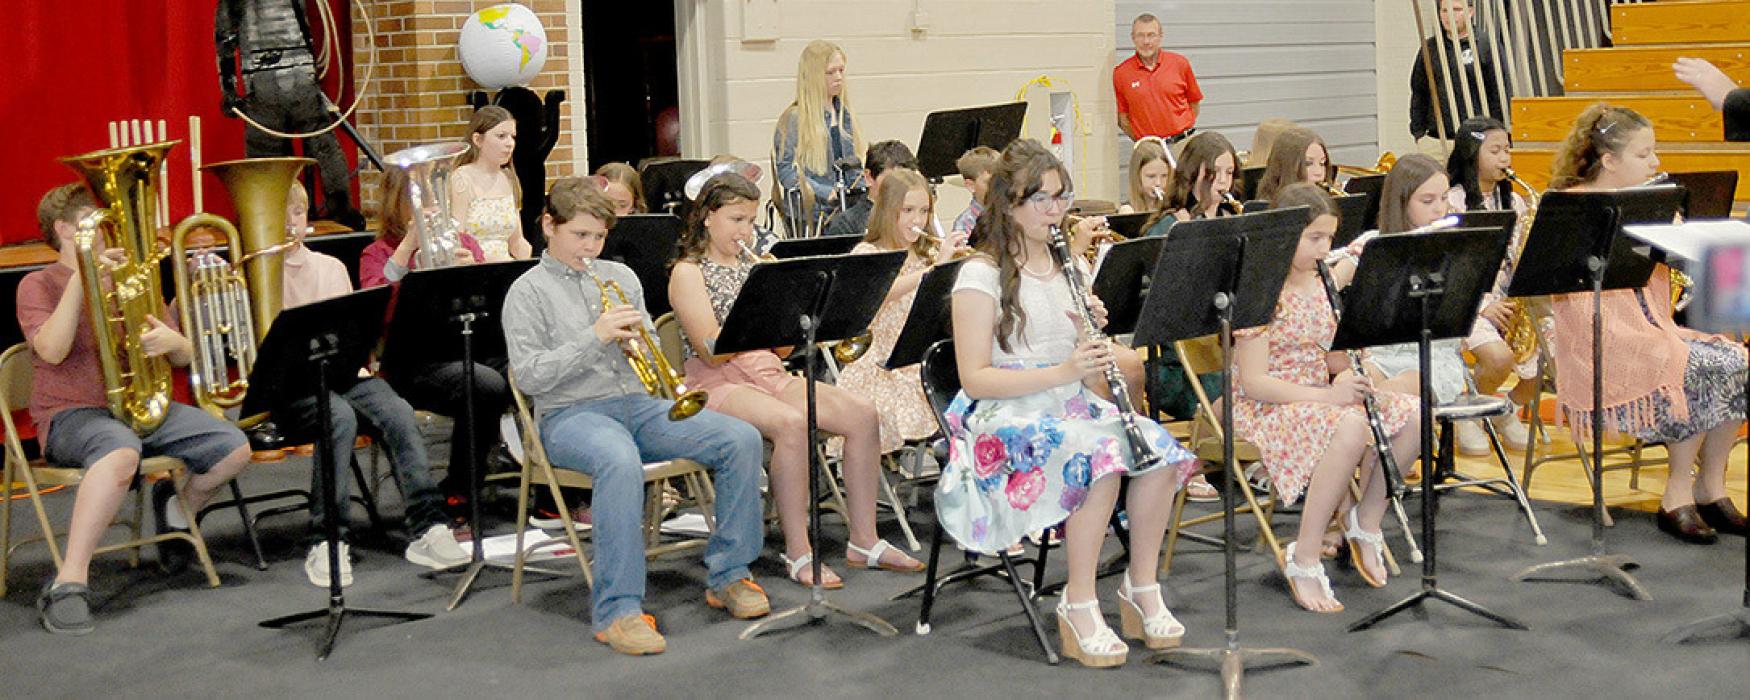 The fifth grade band demonstrated their skills with a couple selections.